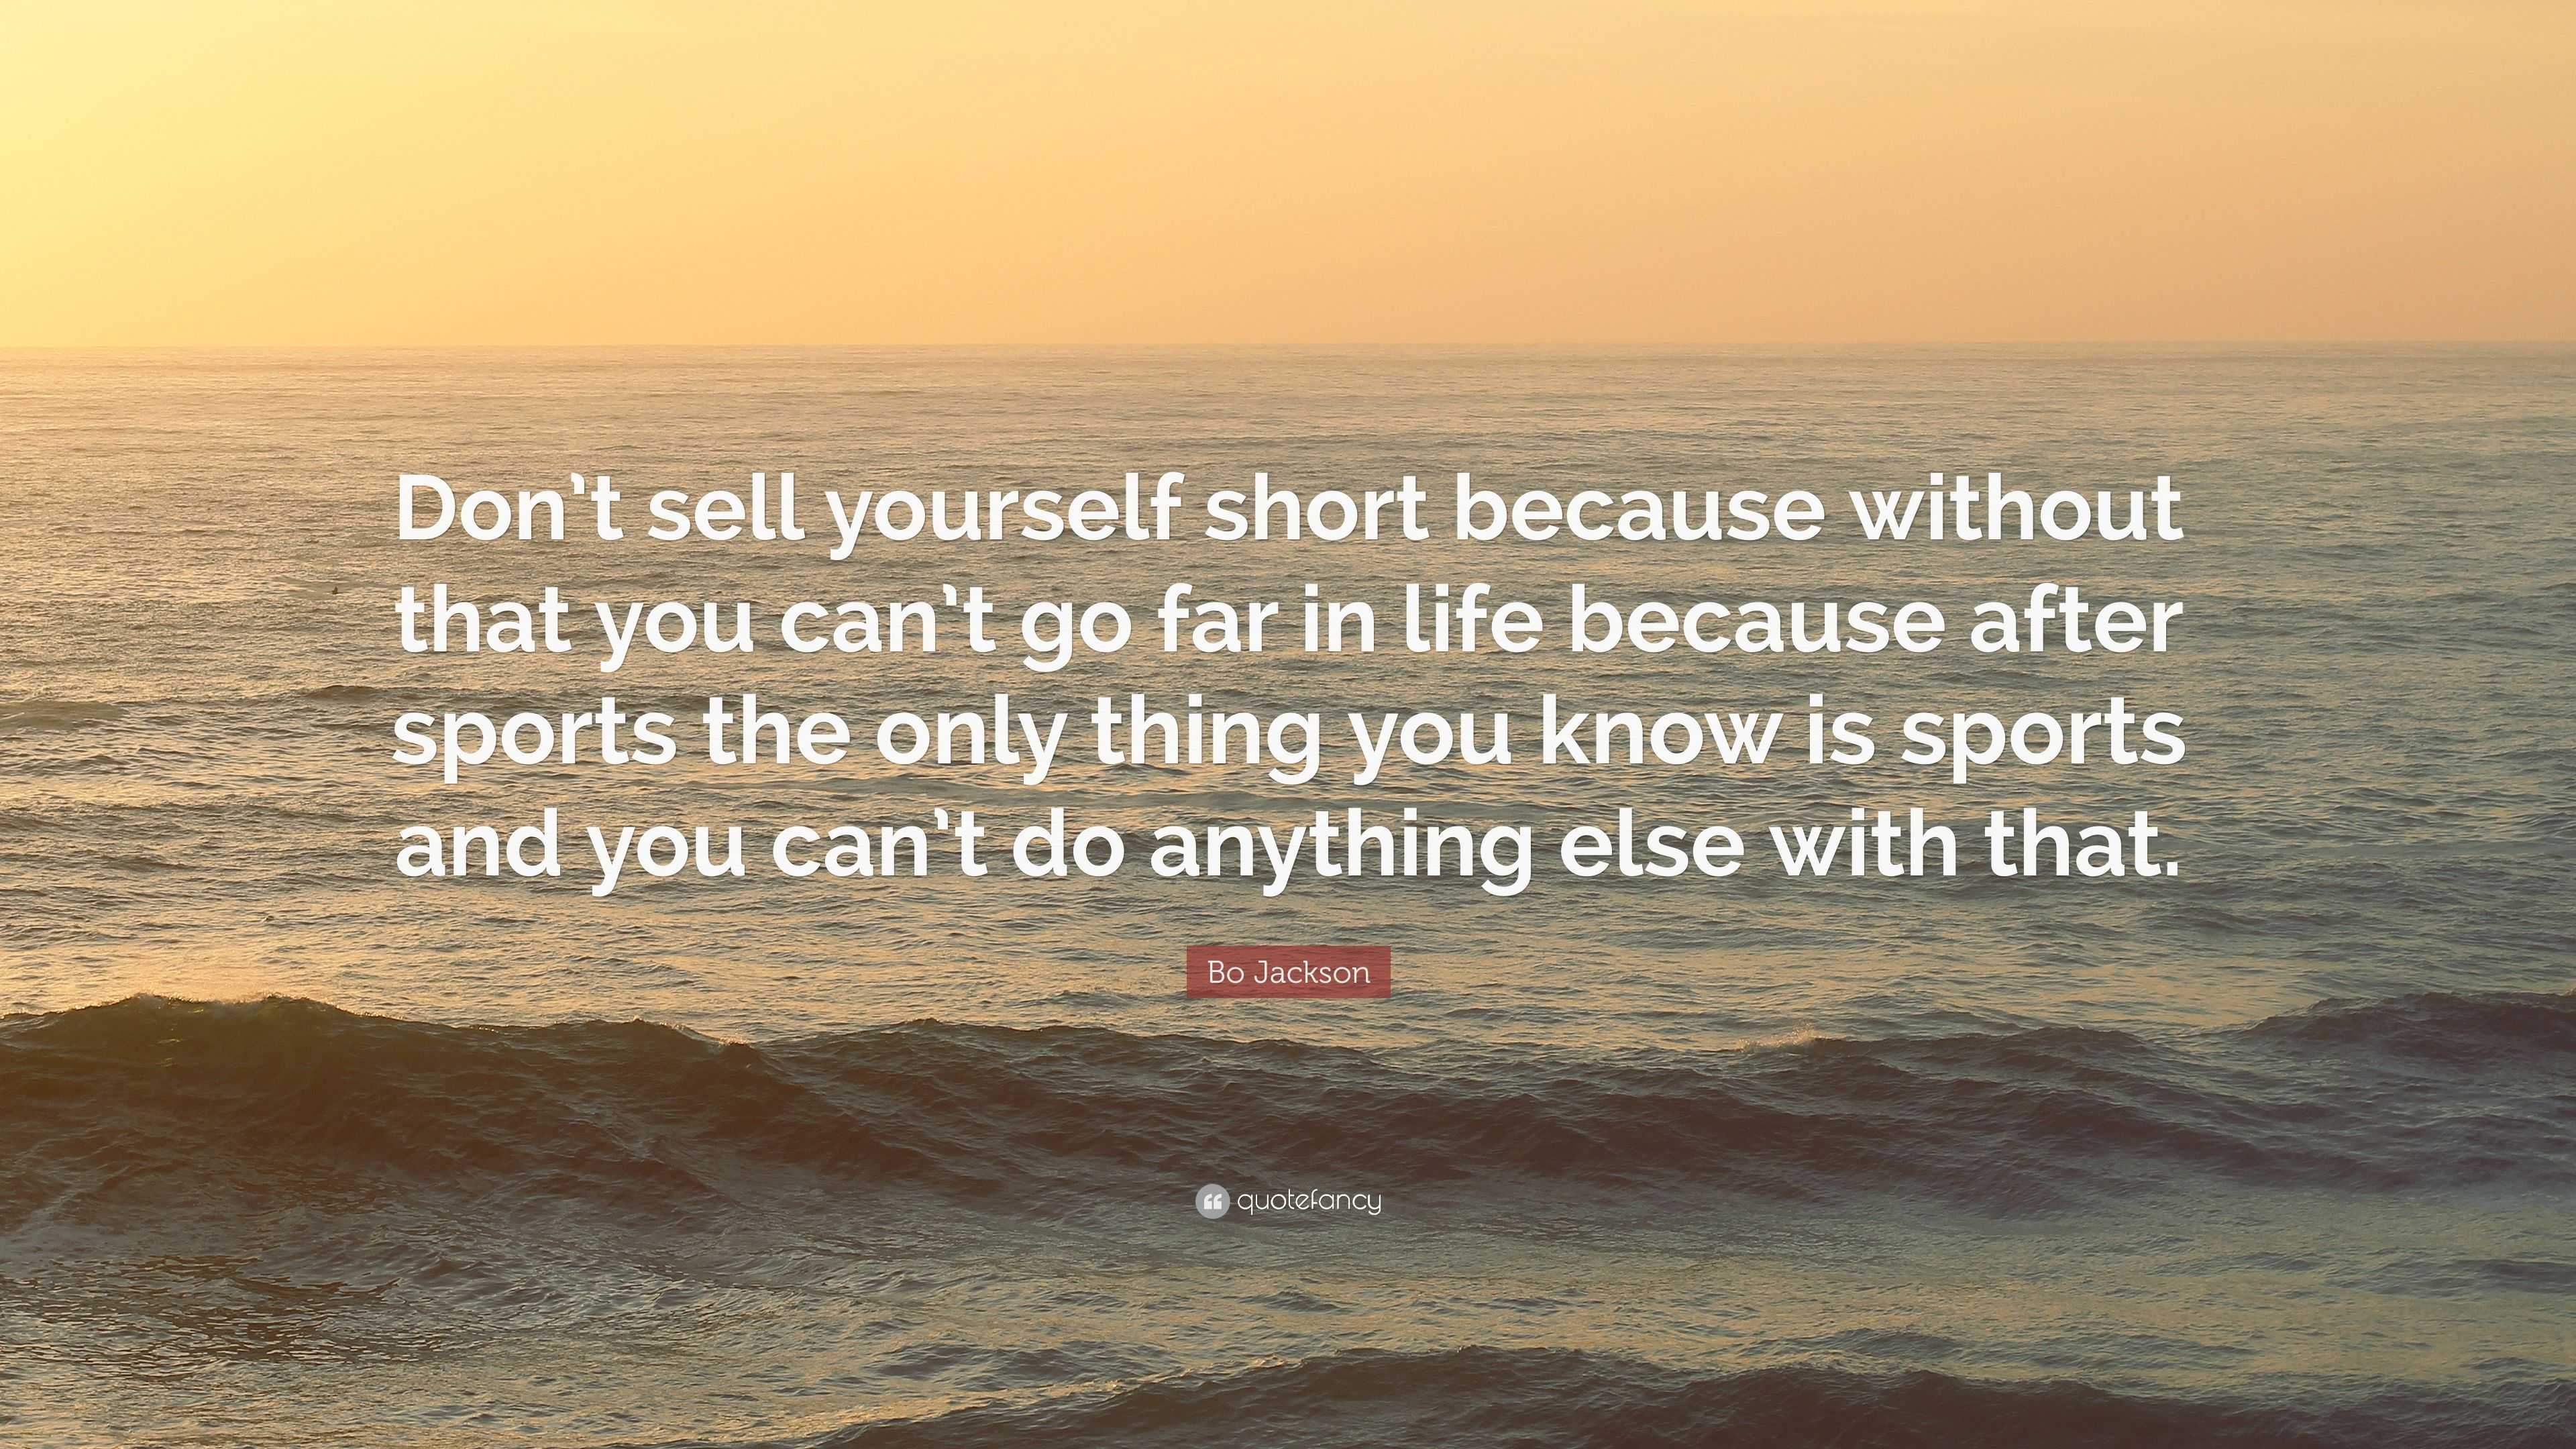 Bo Jackson Quote “Don t sell yourself short because without that you can